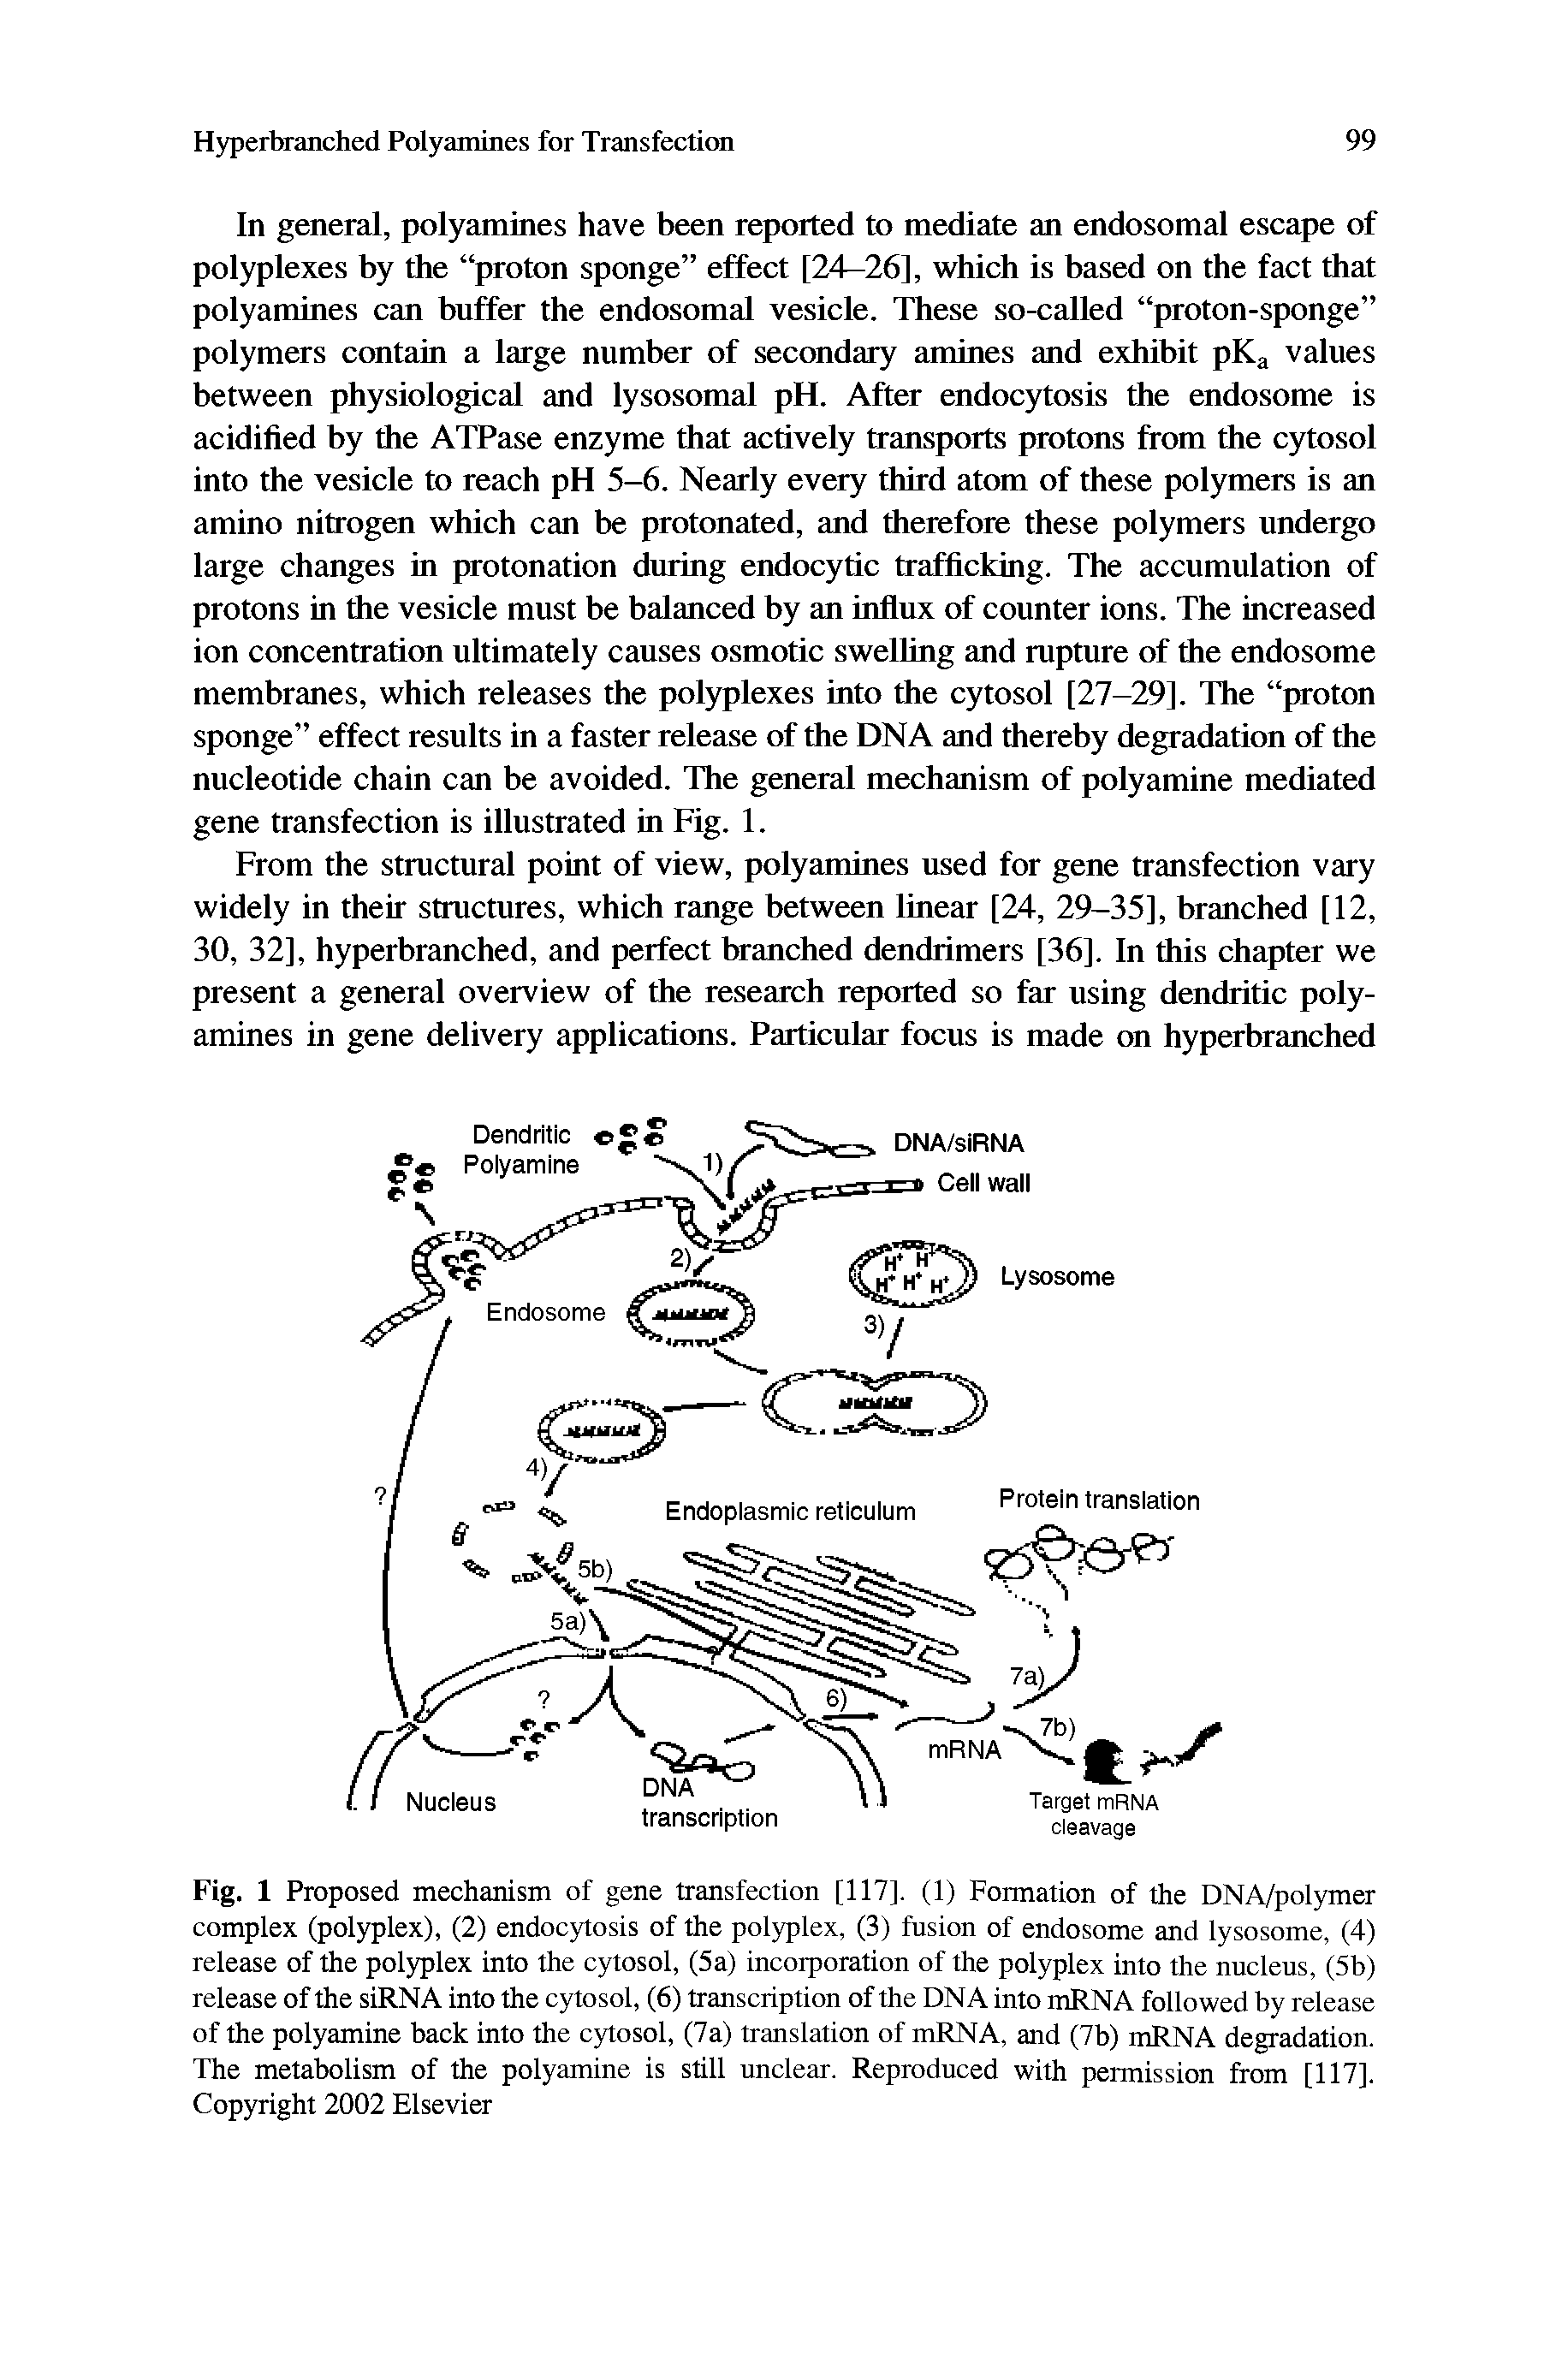 Fig. 1 Proposed mechanism of gene transfection [117]. (1) Formation of the DNA/polymer complex (polyplex), (2) endocytosis of the polyplex, (3) fusion of endosome and lysosome, (4) release of the polyplex into the cytosol, (5a) incorporation of the polyplex into the nucleus, (5b) release of the siRNA into the cytosol, (6) transcription of the DNA into mRNA followed by release of the polyamine back into the cytosol, (7a) translation of mRNA, and (7b) mRNA degradation. The metabolism of the polyamine is still unclear. Reproduced with permission from [117]. Copyright 2002 Elsevier...